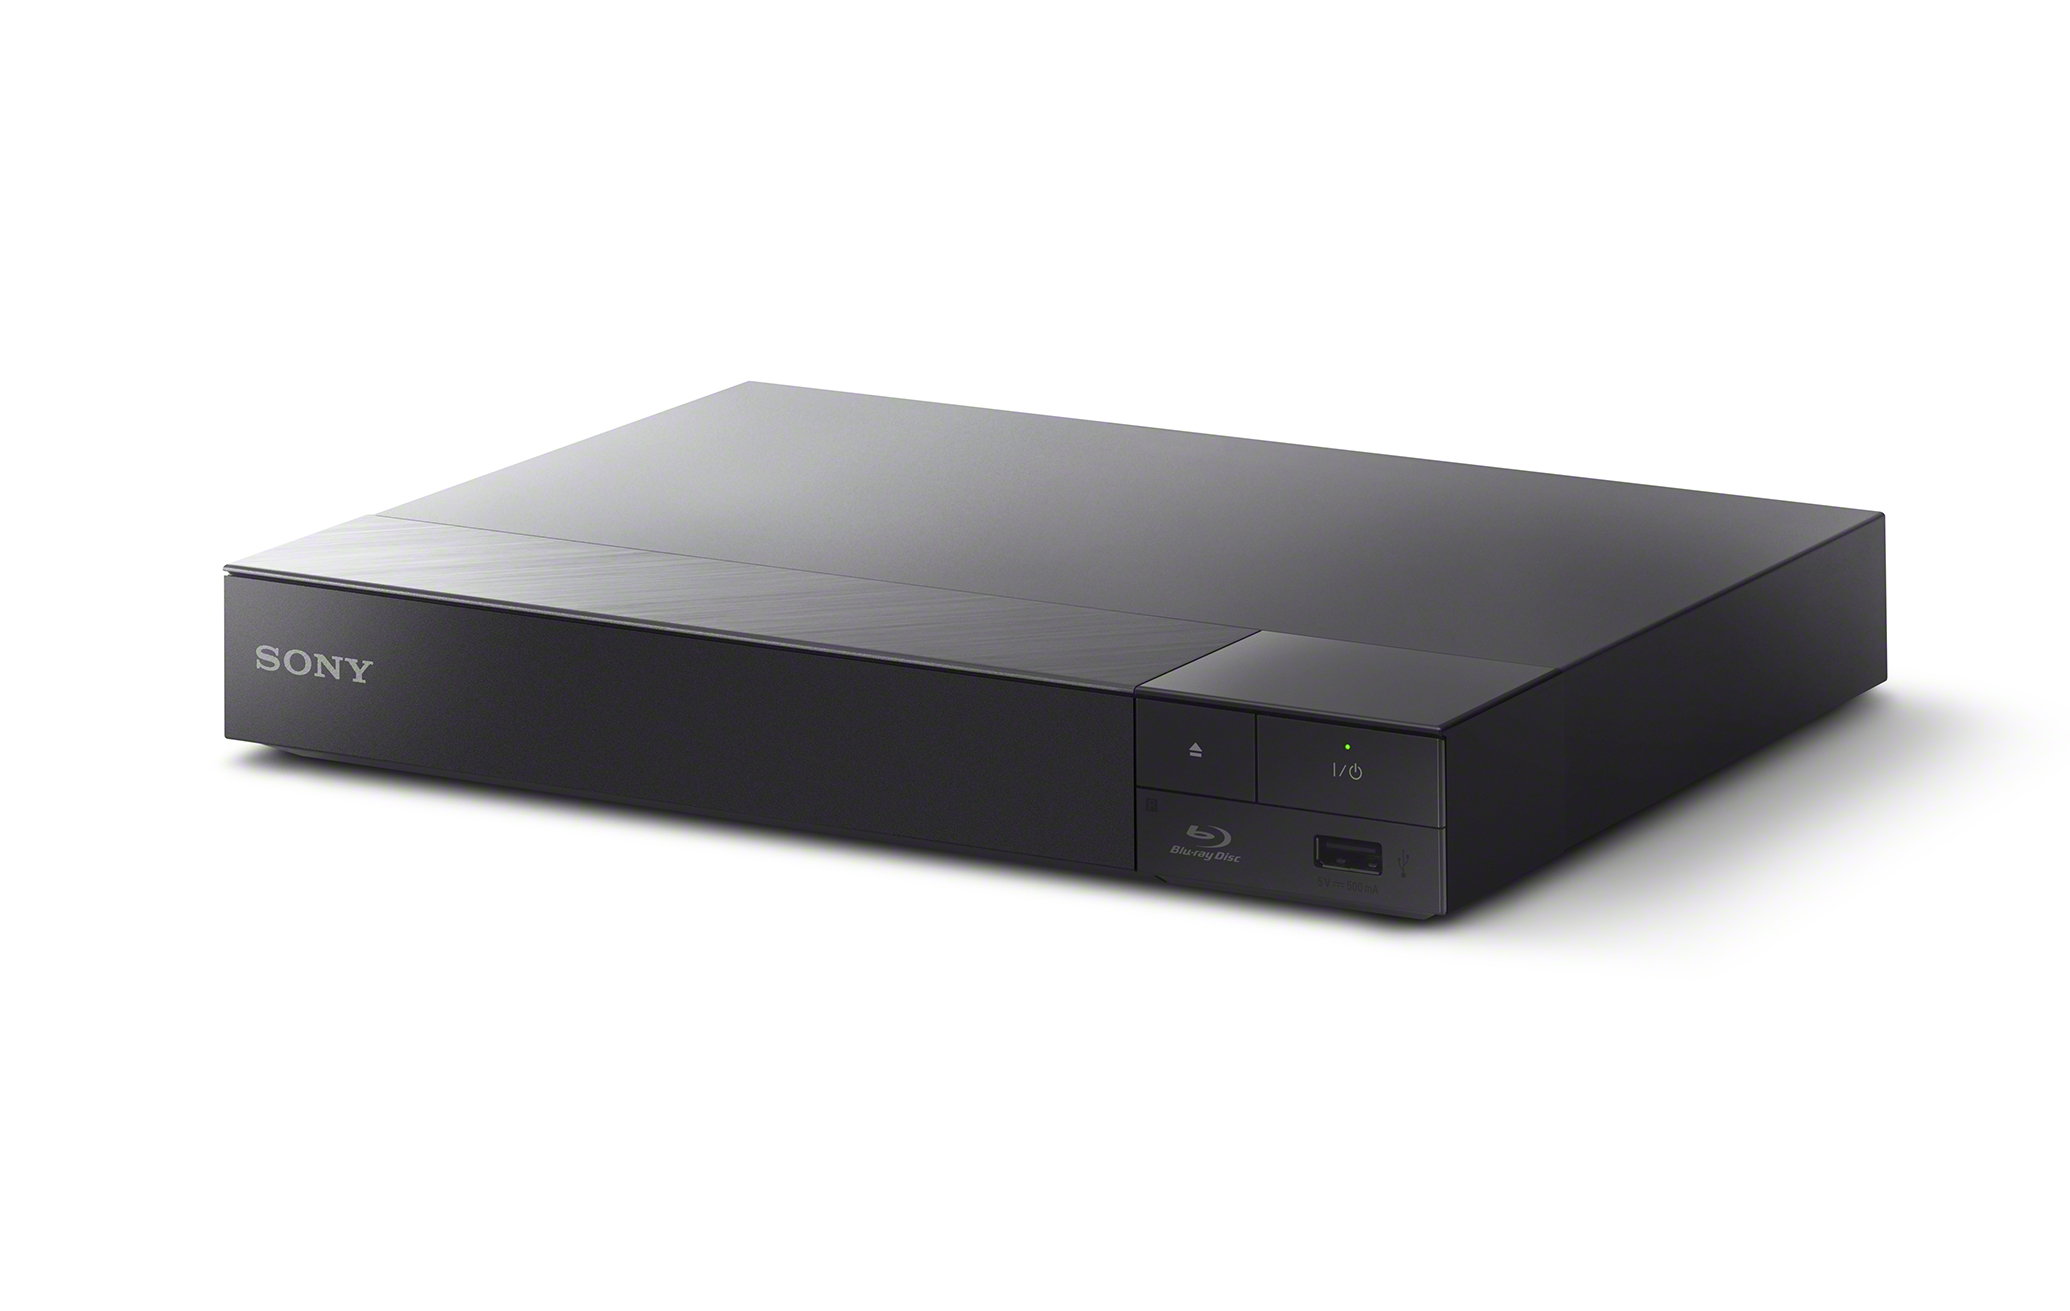 Sony BDP-S6700 4K Upscaling 3D Home Theater Streaming Blu-Ray DVD Player with Wi-Fi, Dolby Digital TrueHD/DTS, and upscaling - image 2 of 10